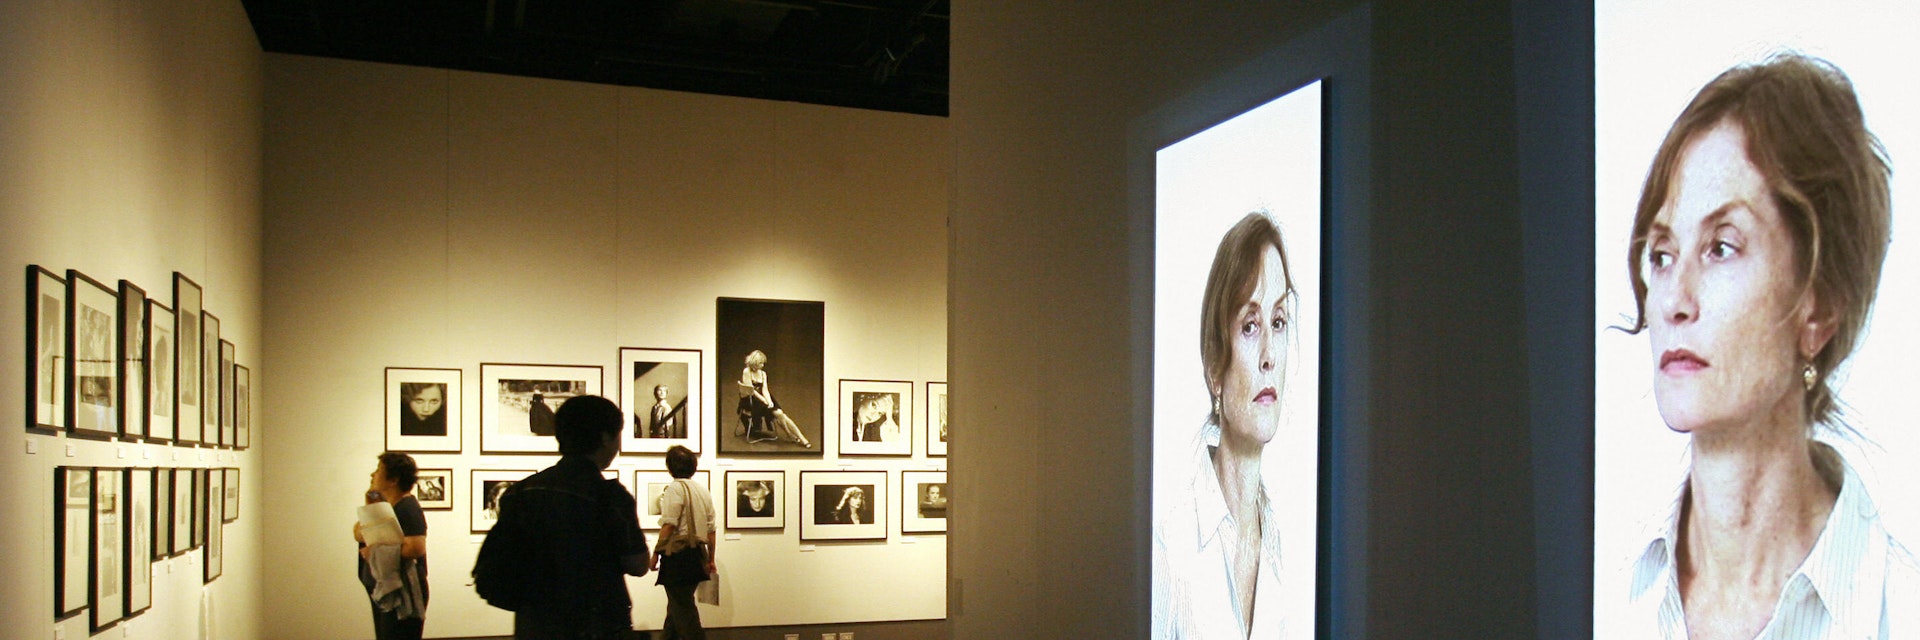 Tokyo, JAPAN:  Video portraits and photographs of French actress Isabelle Huppert are dispayed during a press preview of a photo exhibition "Woman of Many Faces" at the Tokyo Metropolitan Museum of Photography, 30 June 2006. Over 100 photographic and video portraits by legendary artists, including Henri Cartier-Bresson, Richard Avedon, Helmut Newton, will be held a montly exhibition until 06 August.  AFP PHOTO/Kazuhiro NOGI    (Photo credit should read KAZUHIRO NOGI/AFP/Getty Images)